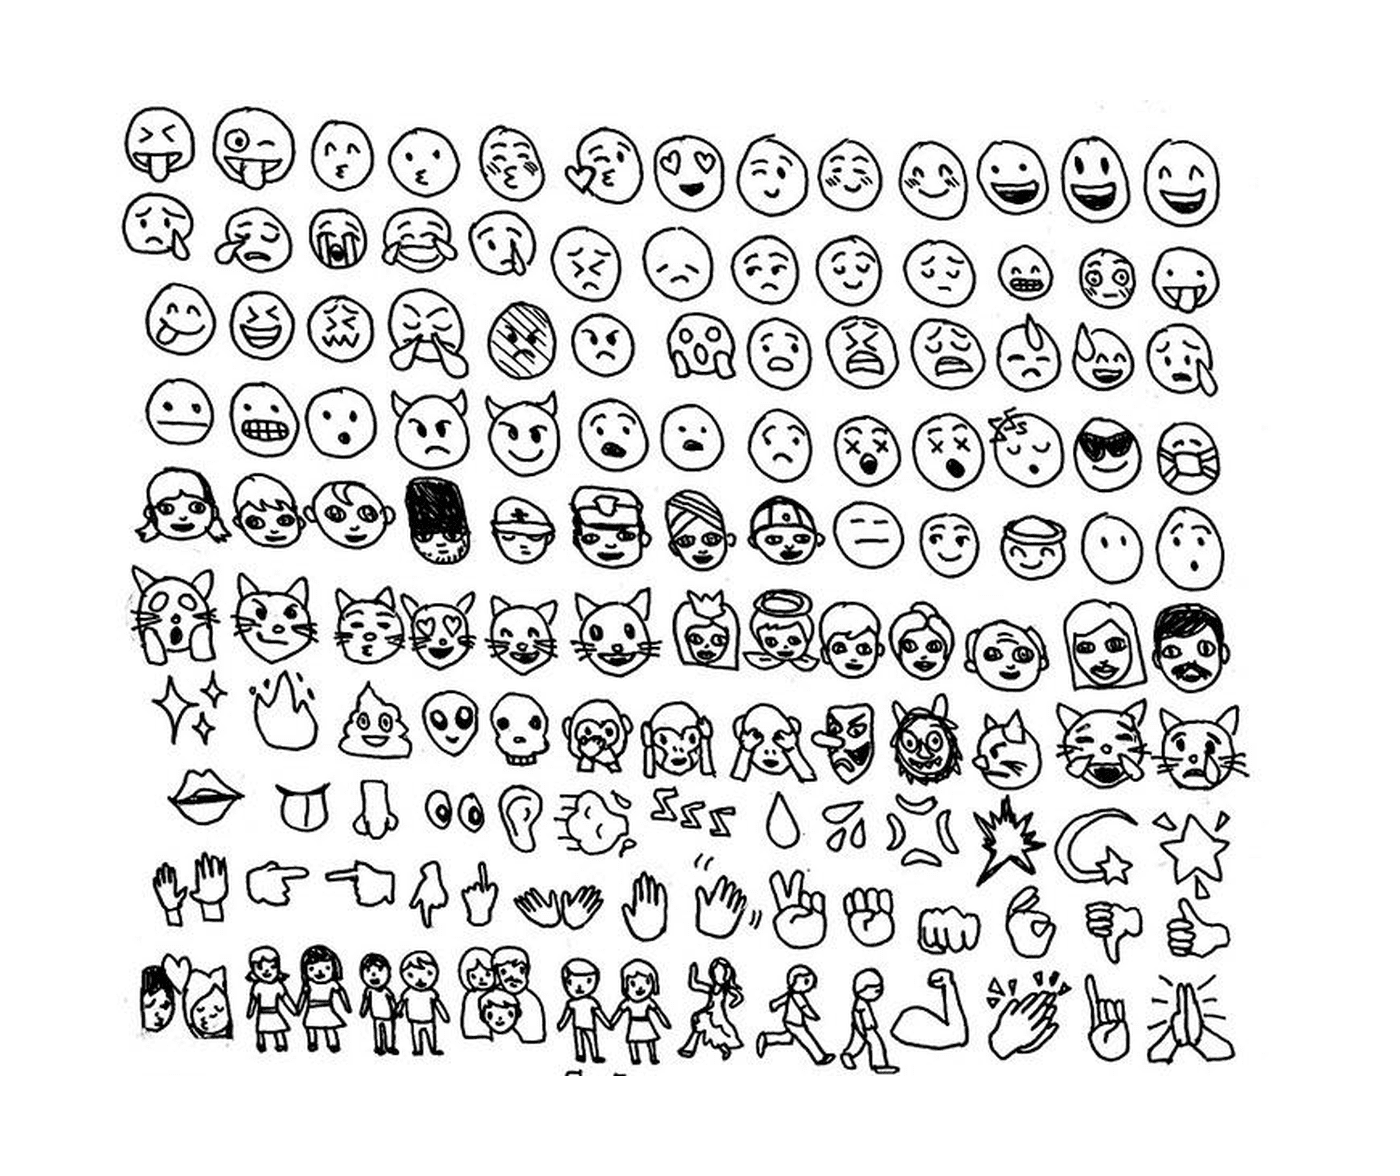  A set of different faces drawn on paper 